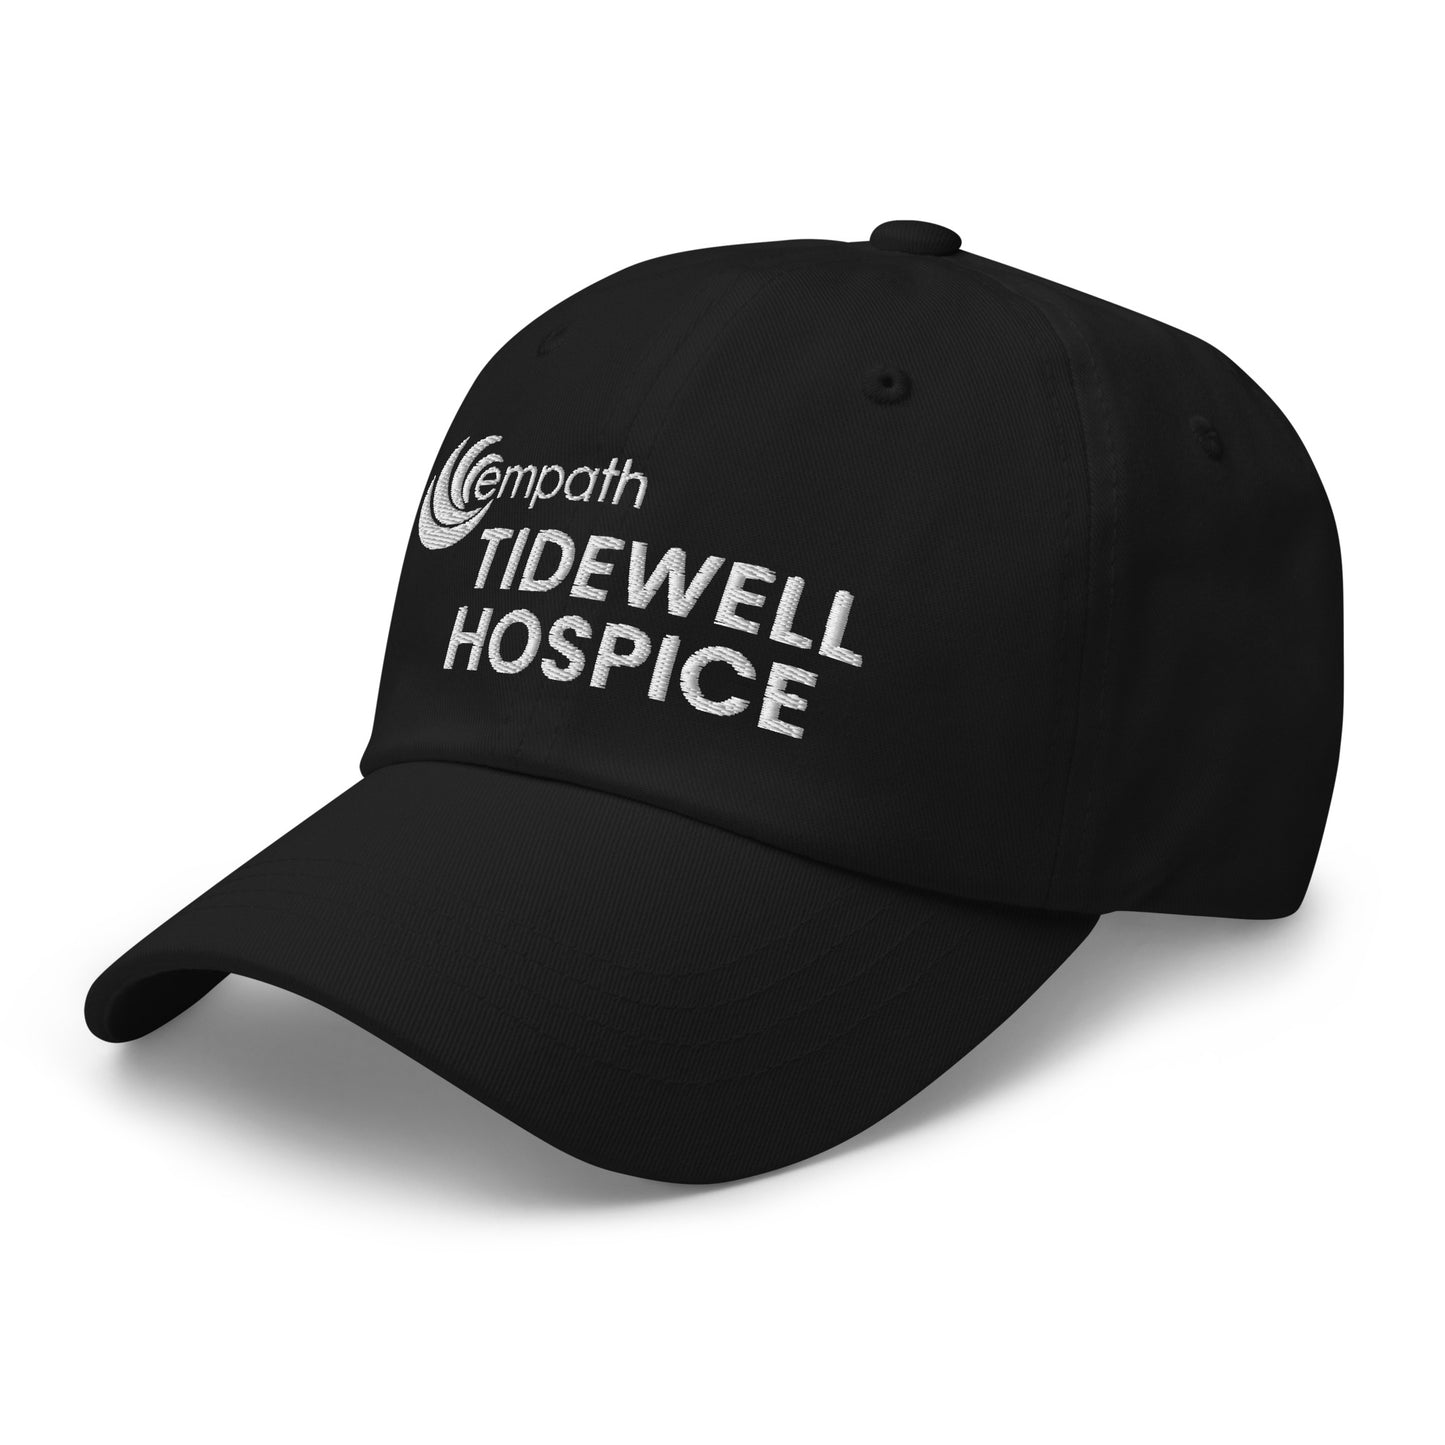 Classic Dad hat - Tidewell Hospice